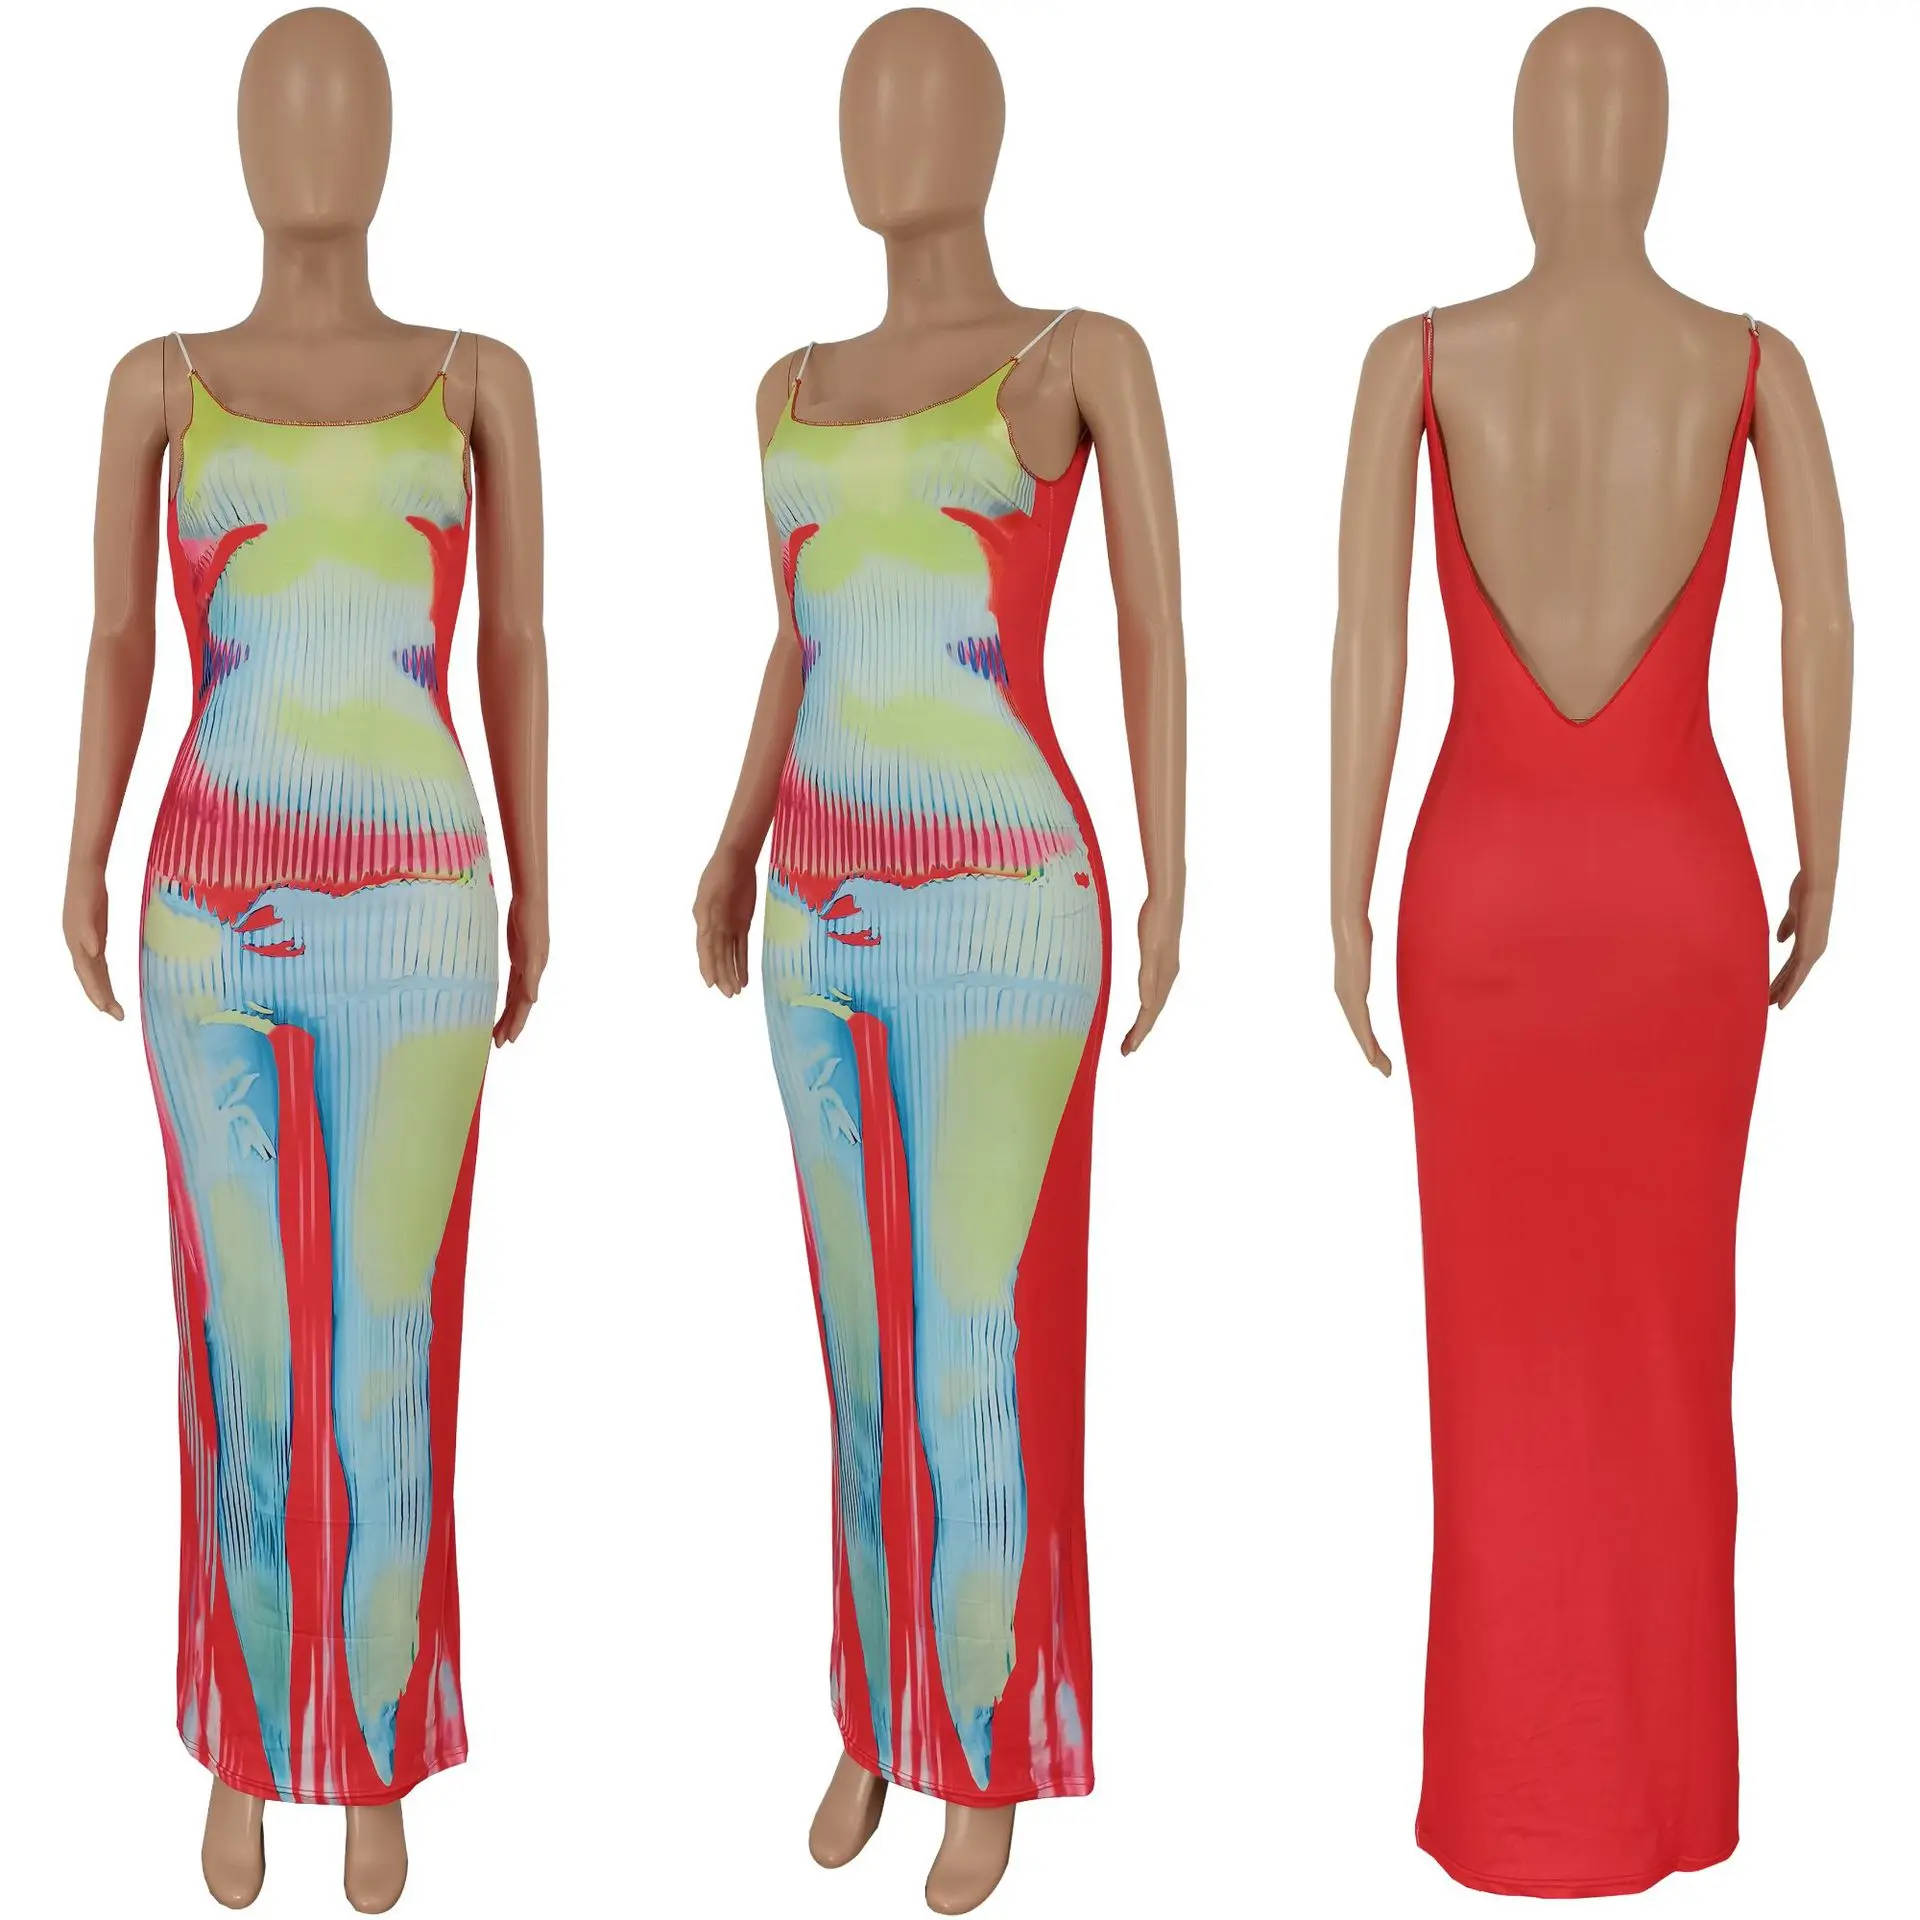 Women dress 2023 sleeveless halter backless printing maxi bodycon casual dresses for woman ladies